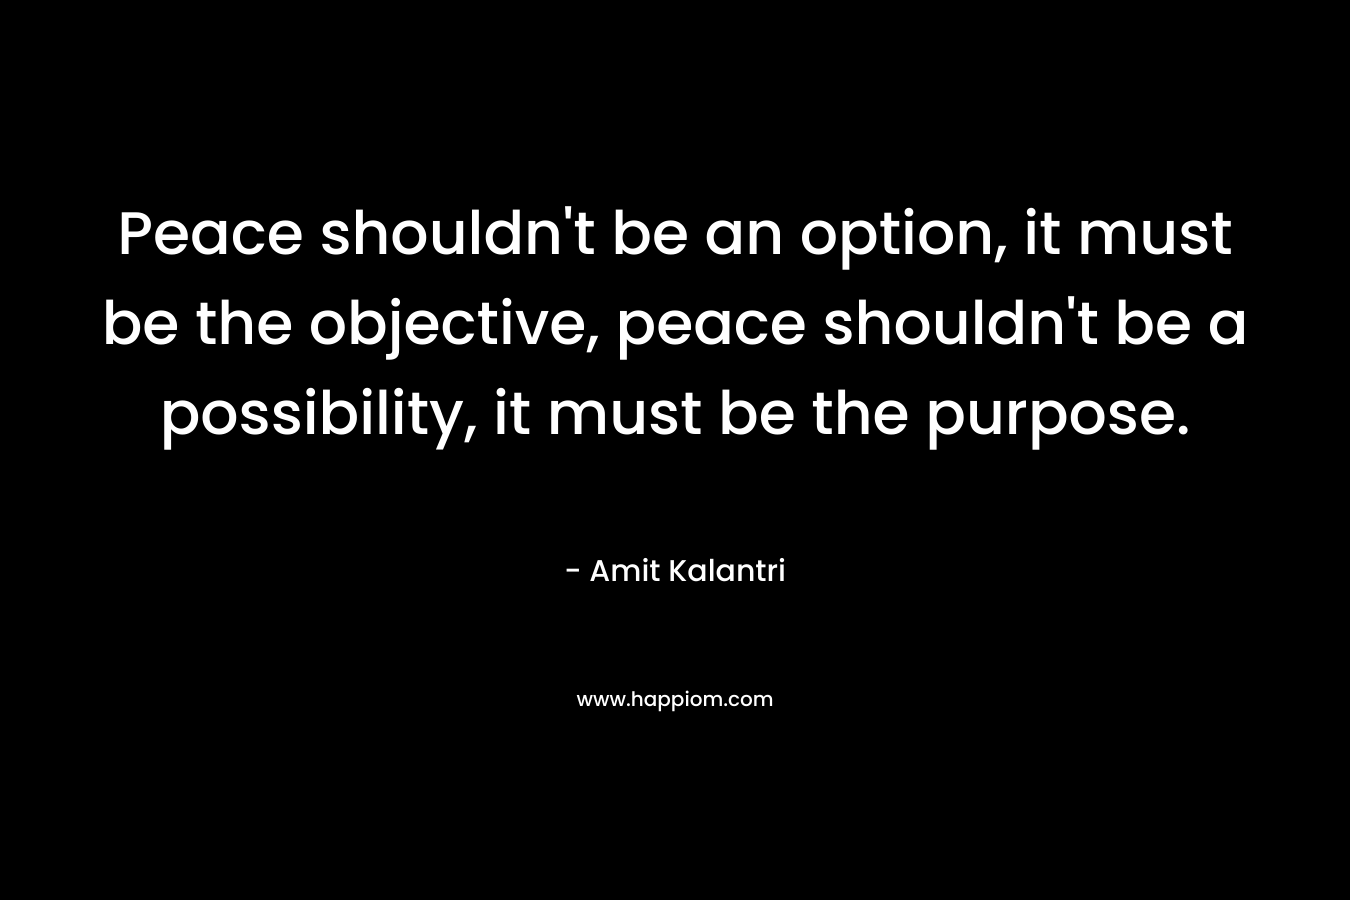 Peace shouldn't be an option, it must be the objective, peace shouldn't be a possibility, it must be the purpose.